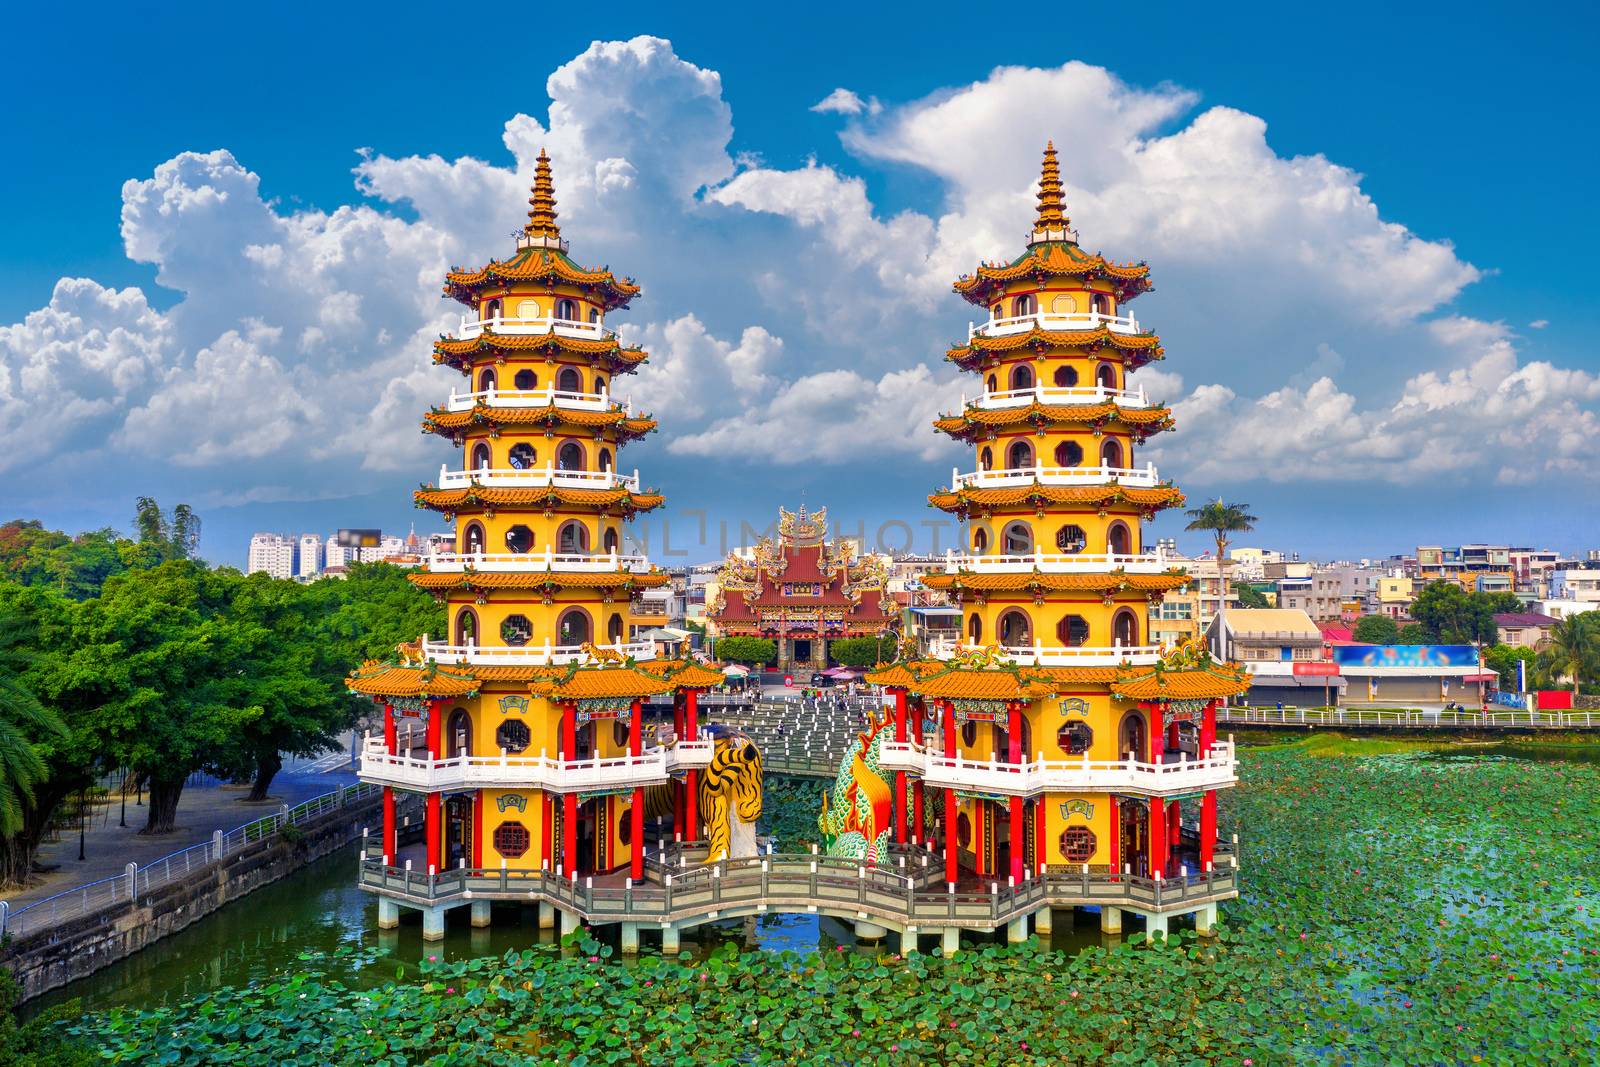 Dragon and Tiger Pagodas in Kaohsiung, Taiwan. by gutarphotoghaphy